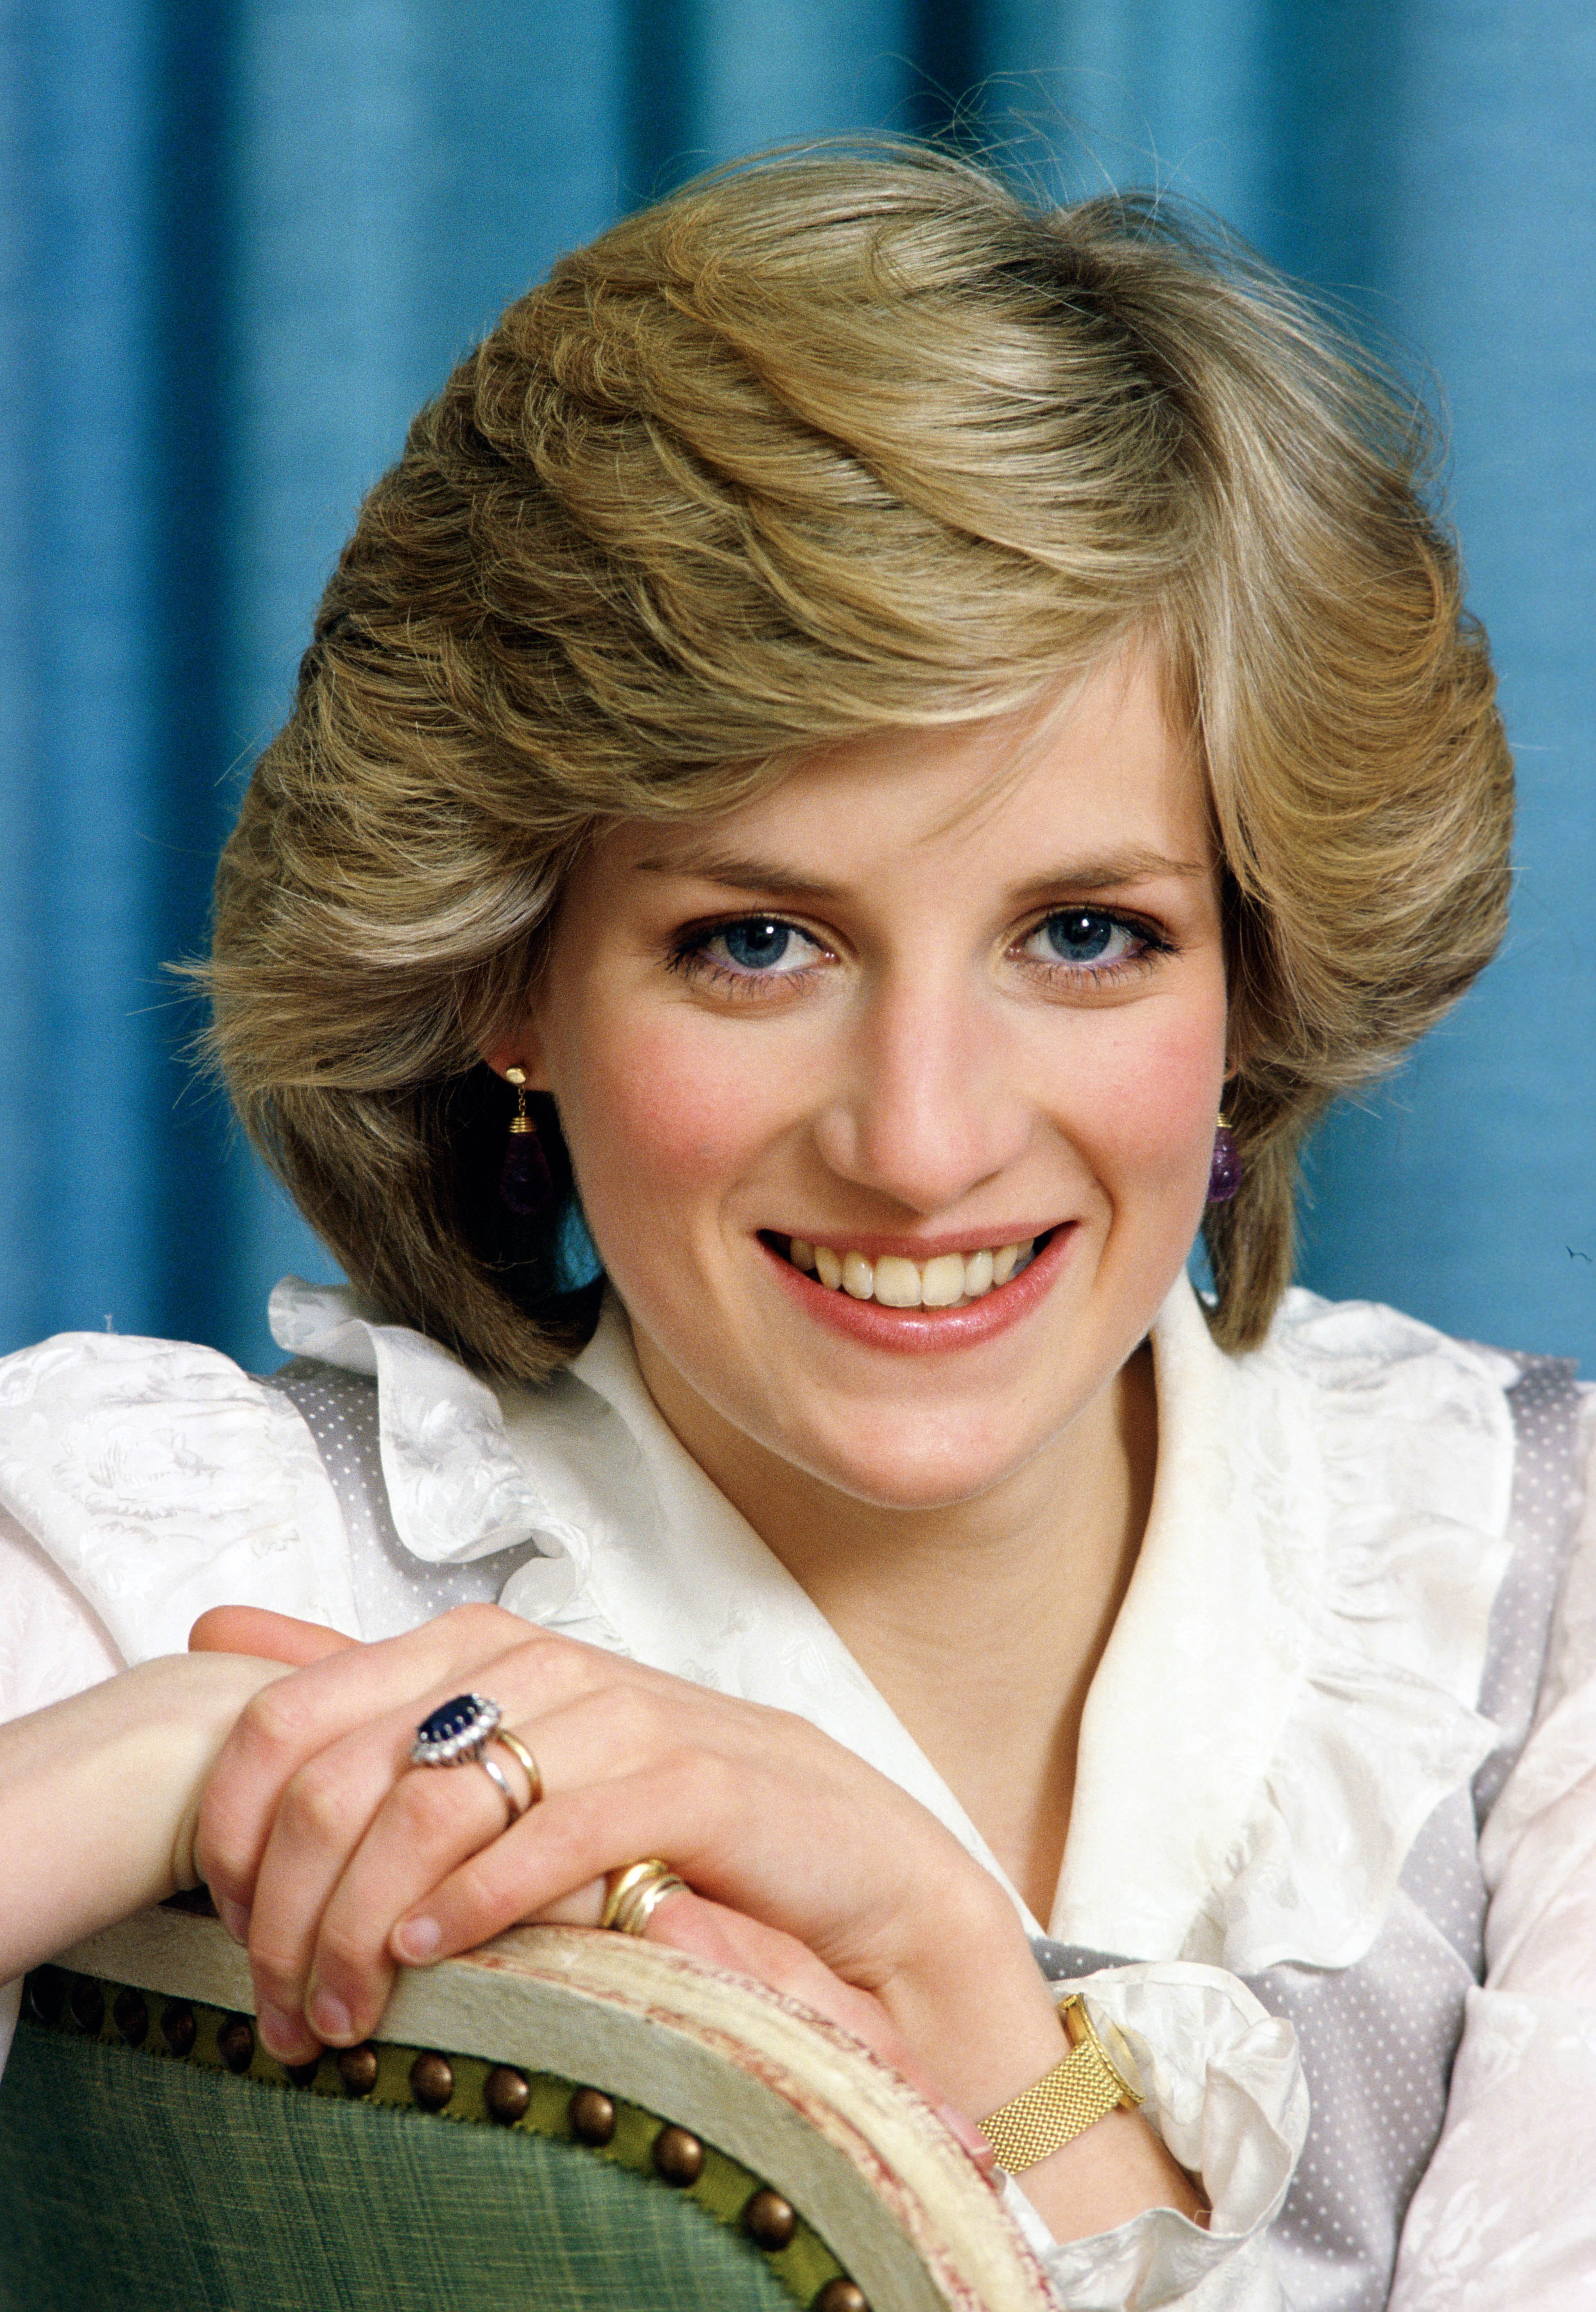 Pictured: Diana, Princess of Wales poses for a photograph at her home in Kensington Palace | Photo: Getty Images